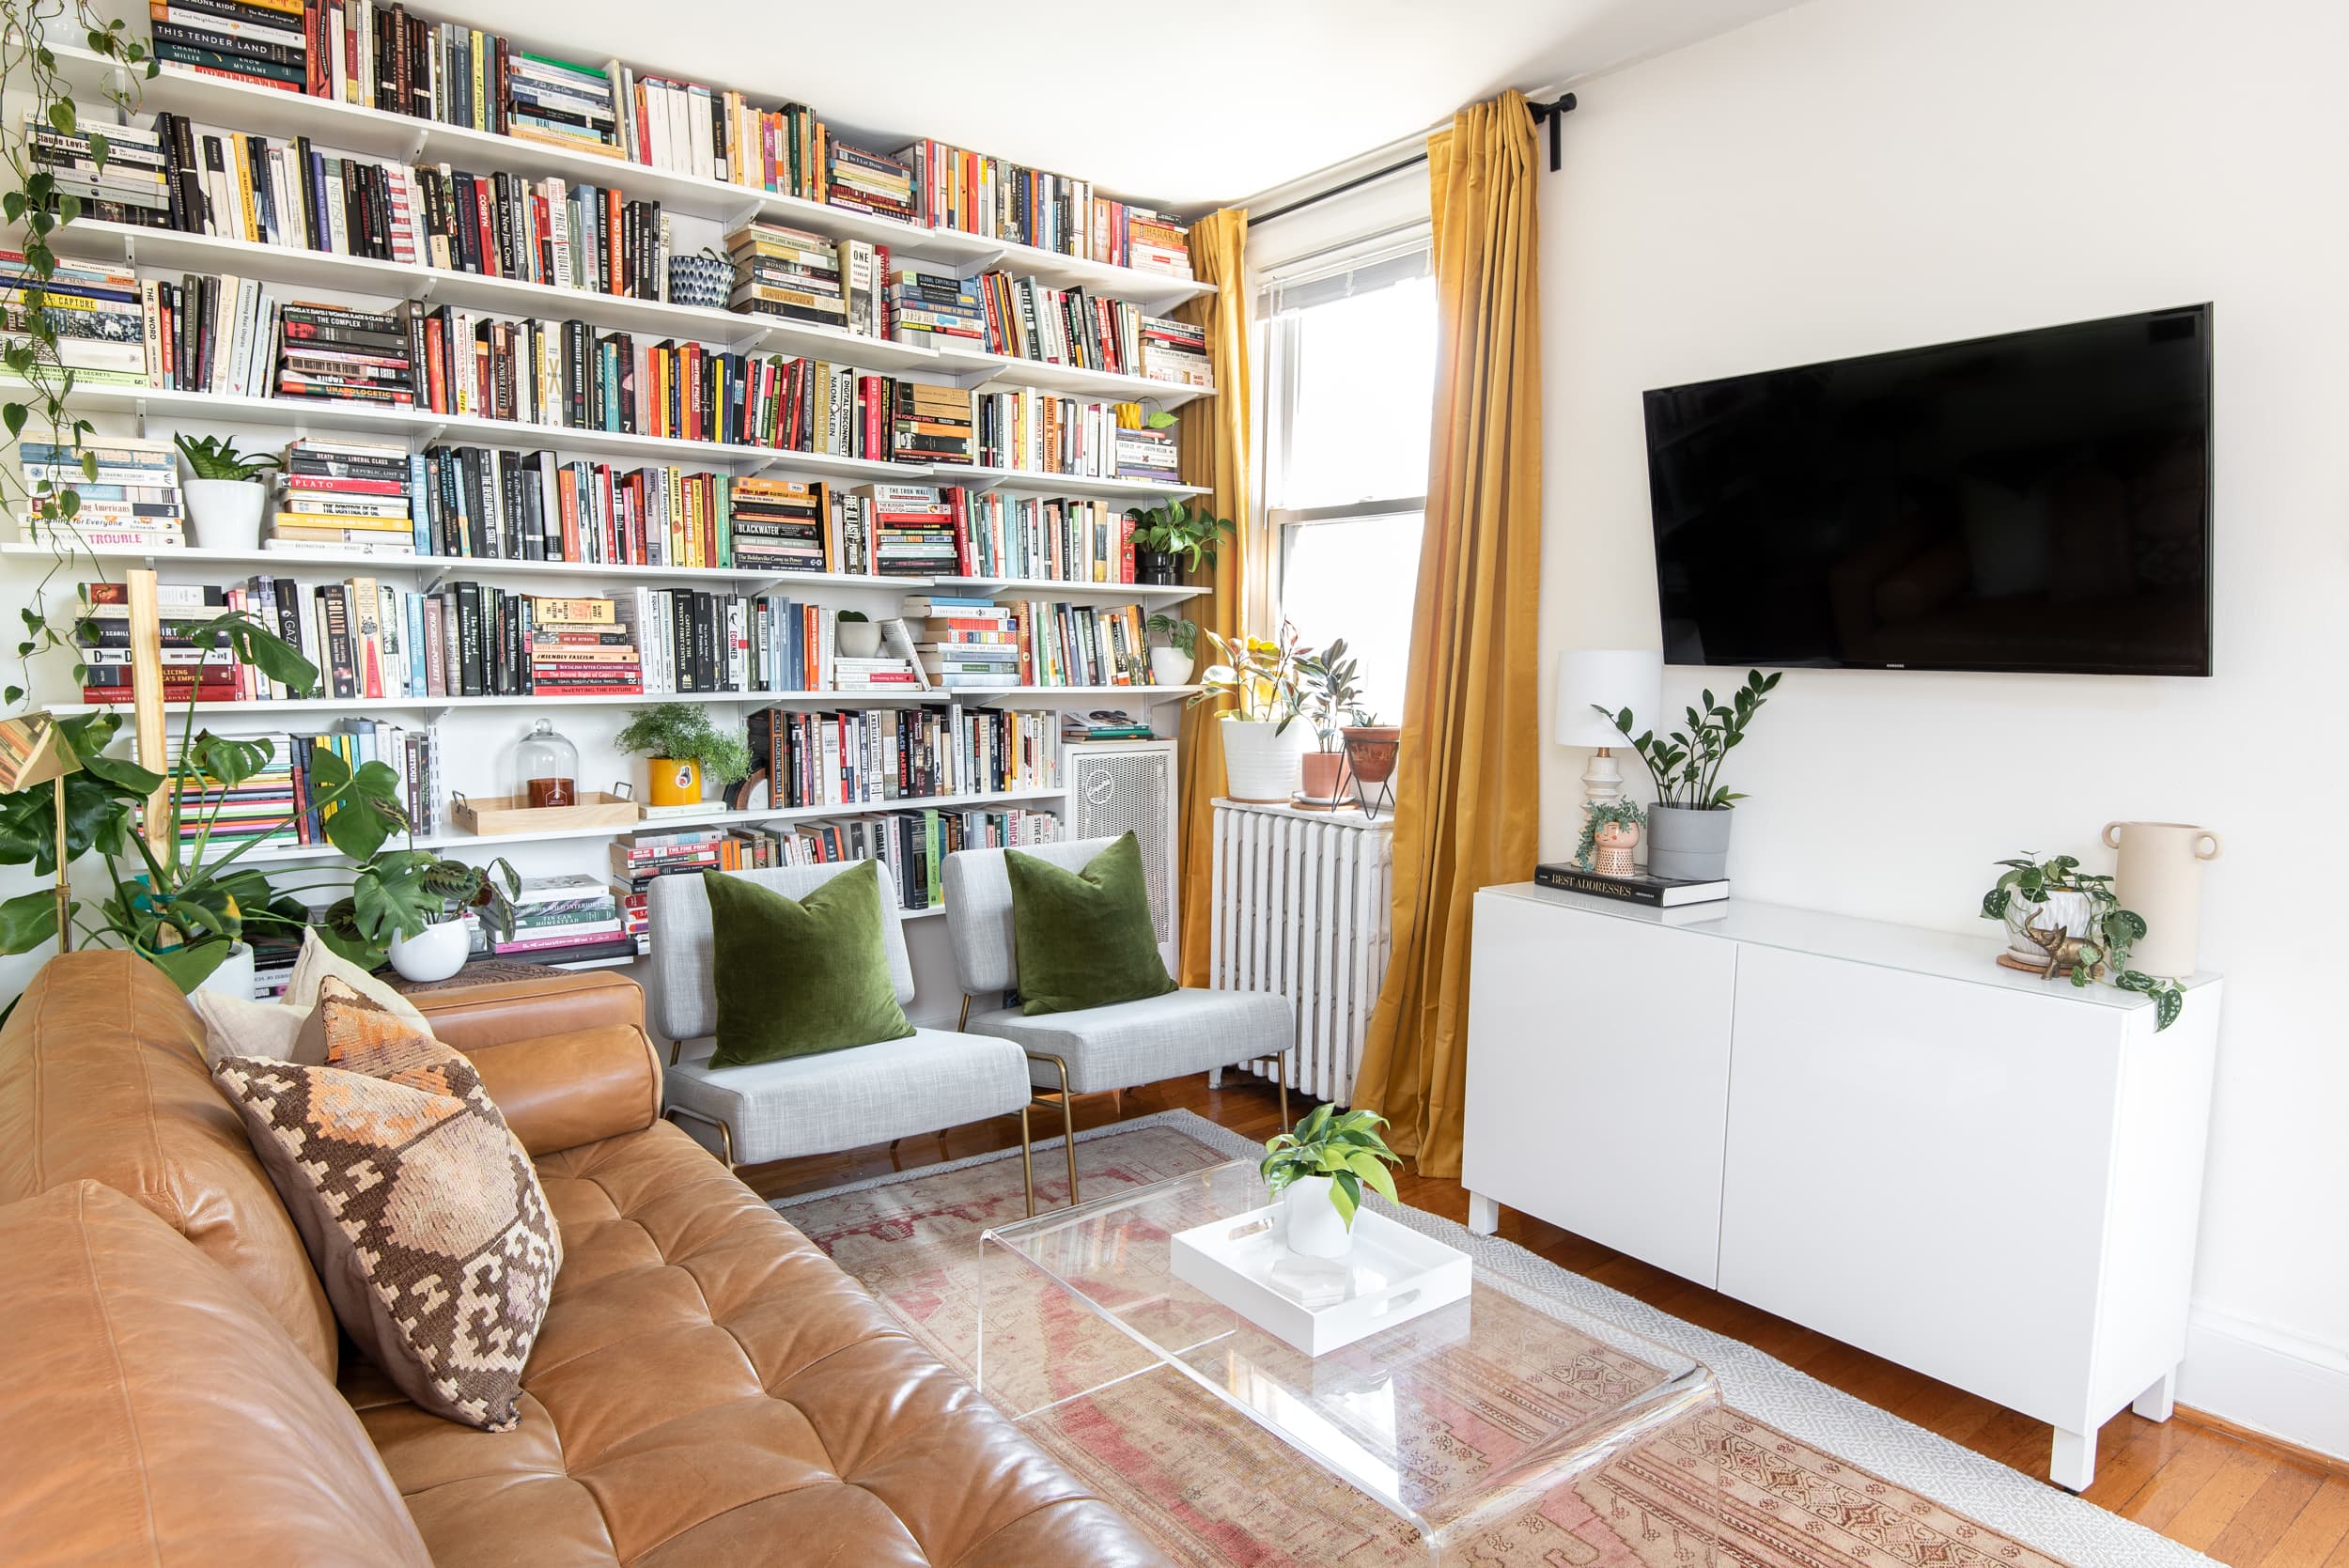 Six Apartment Upgrades to Make Your Rental Feel More Like Home